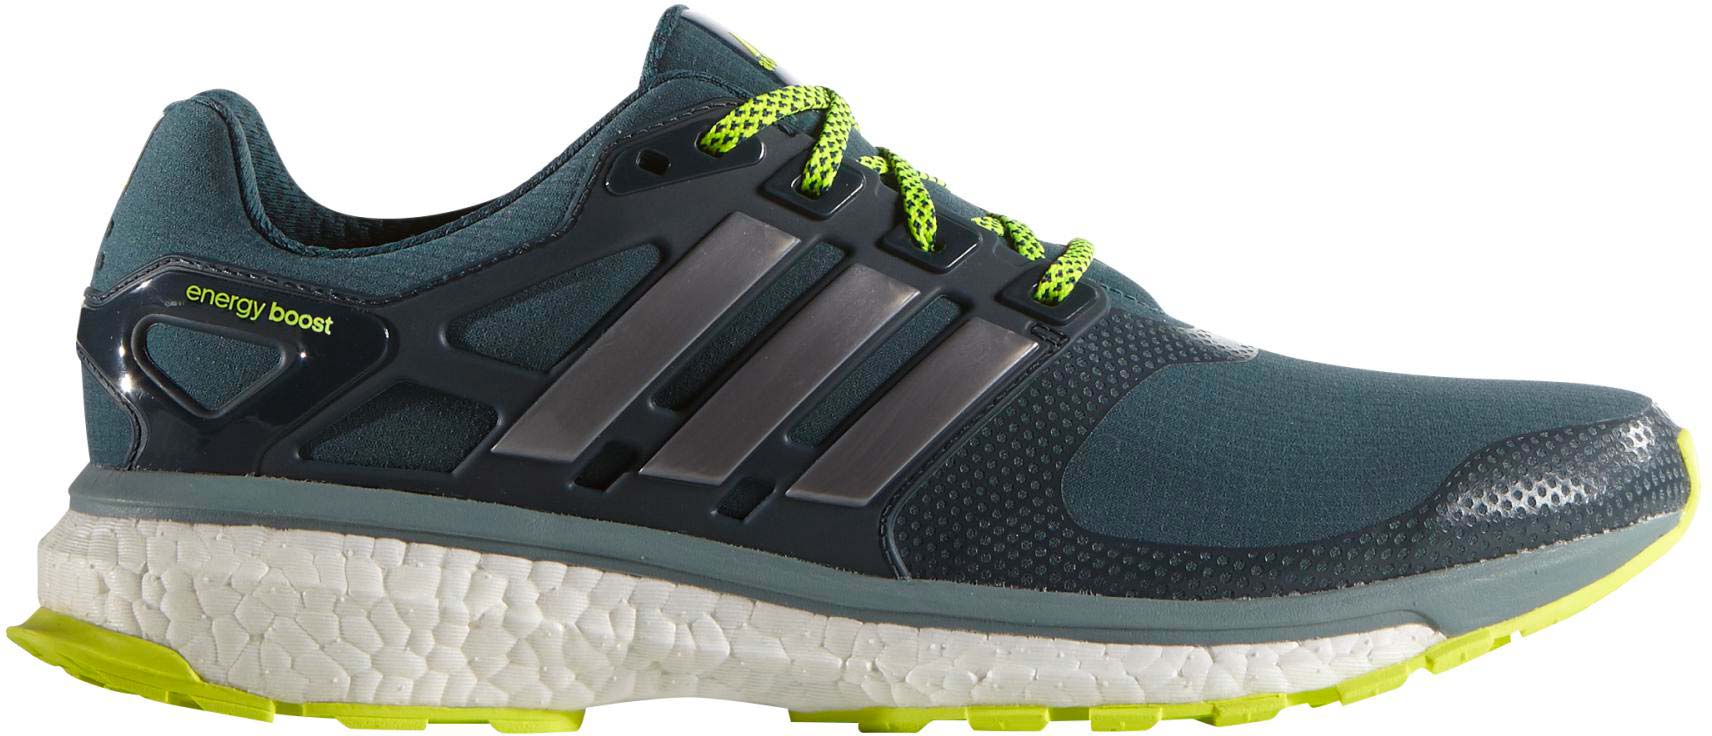 adidas energy boost 2 shoes